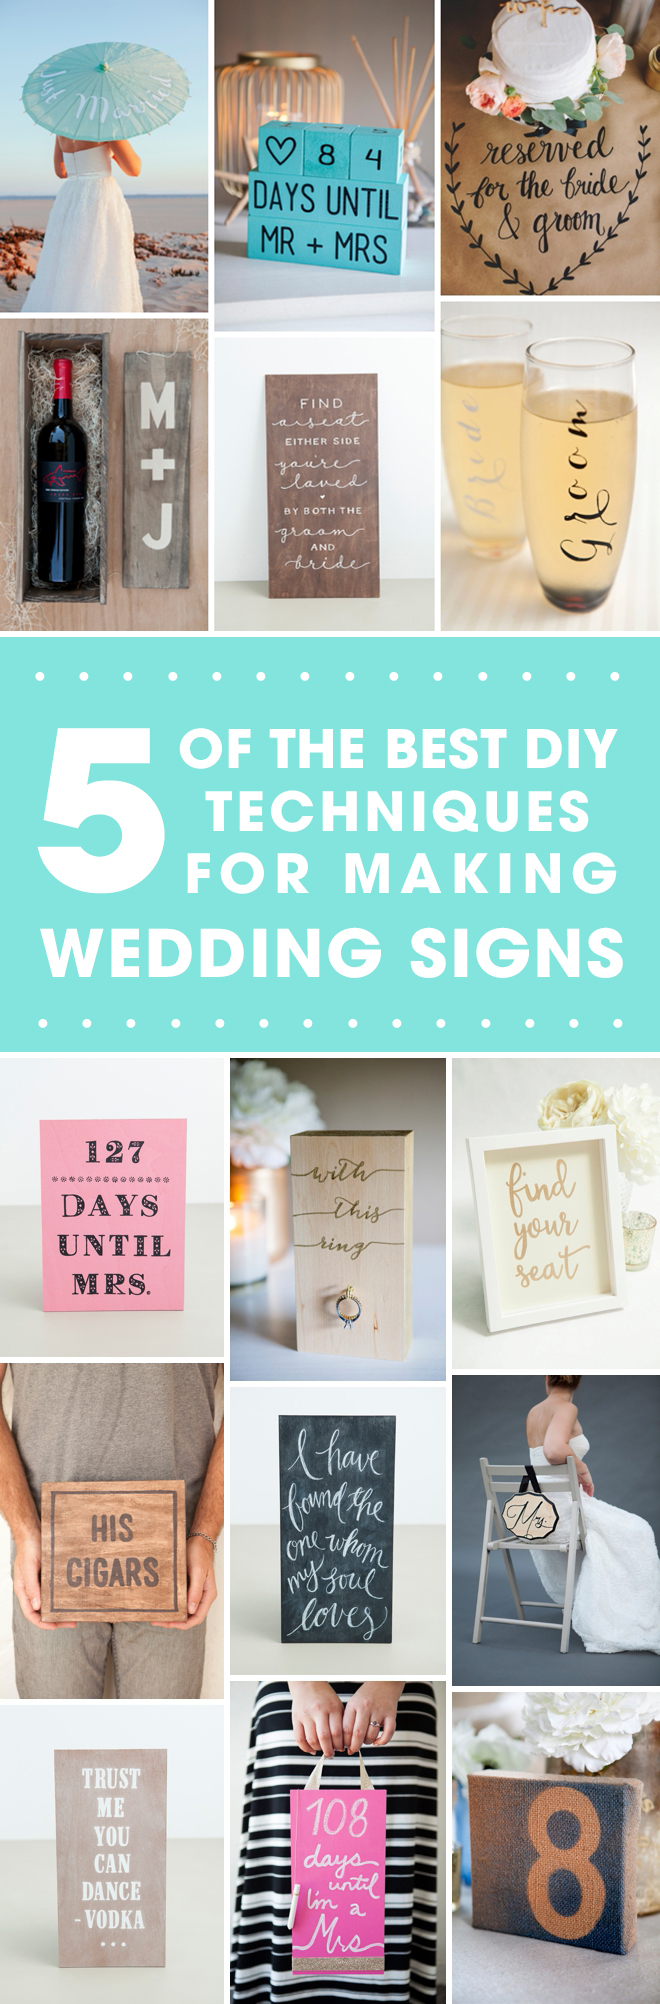 The 5 Ultimate Techniques For Making Wedding Signs!